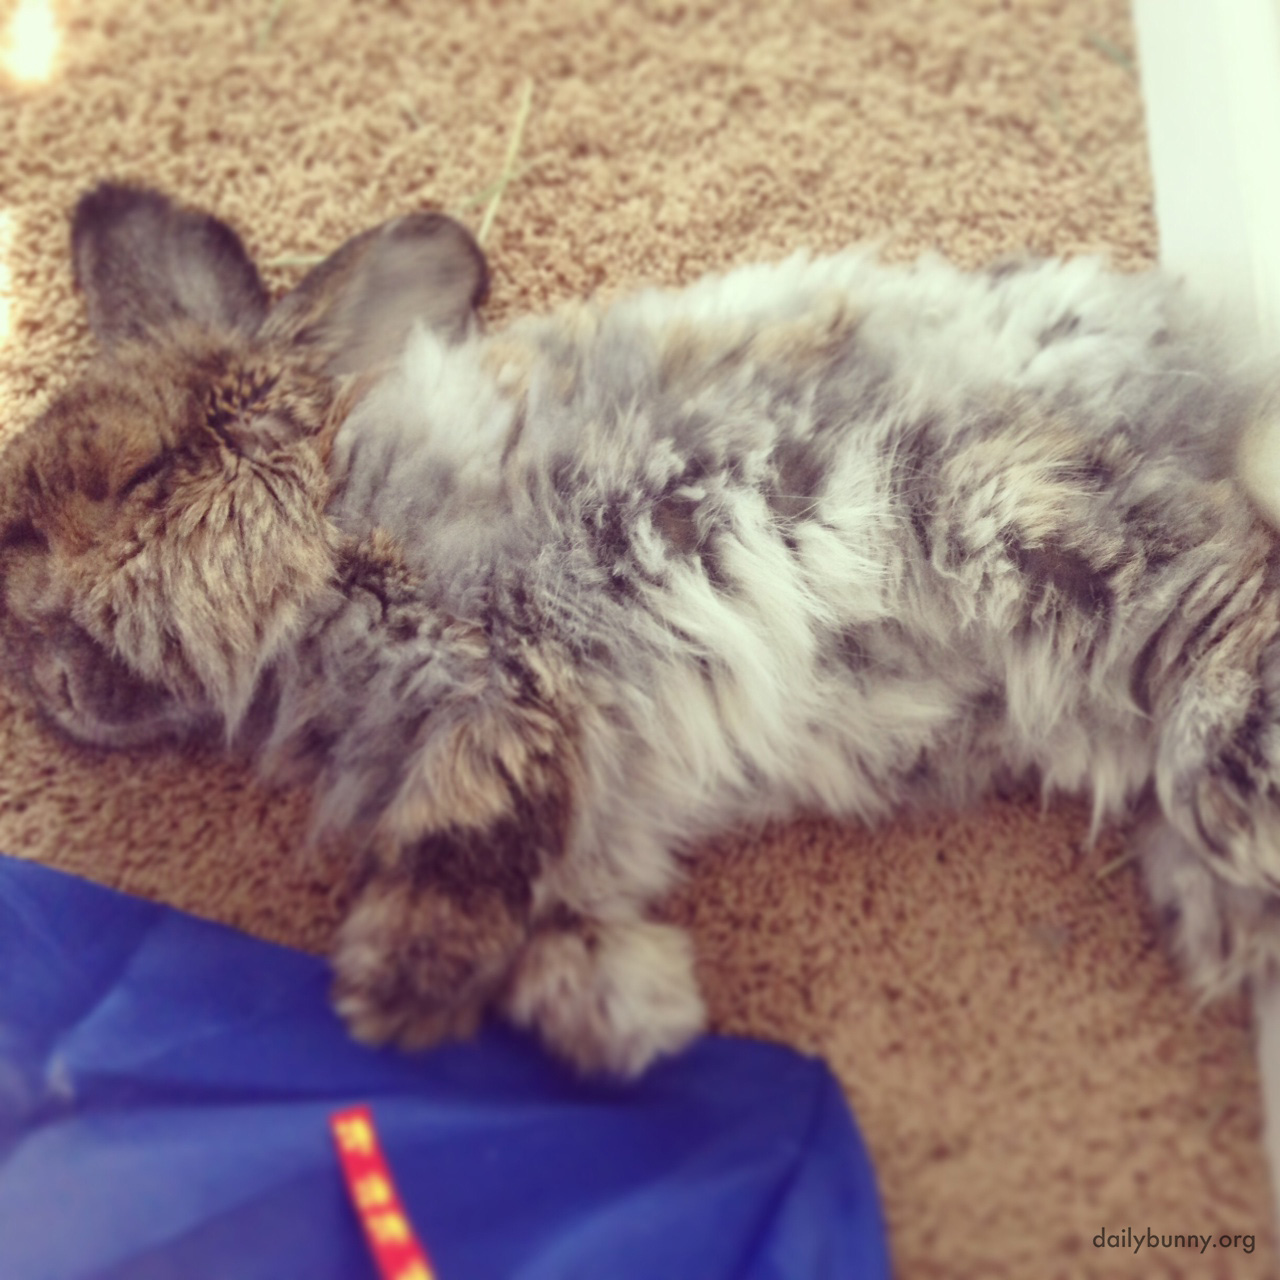 Being So Cute and Fluffy Is Just Exhausting for Bunny